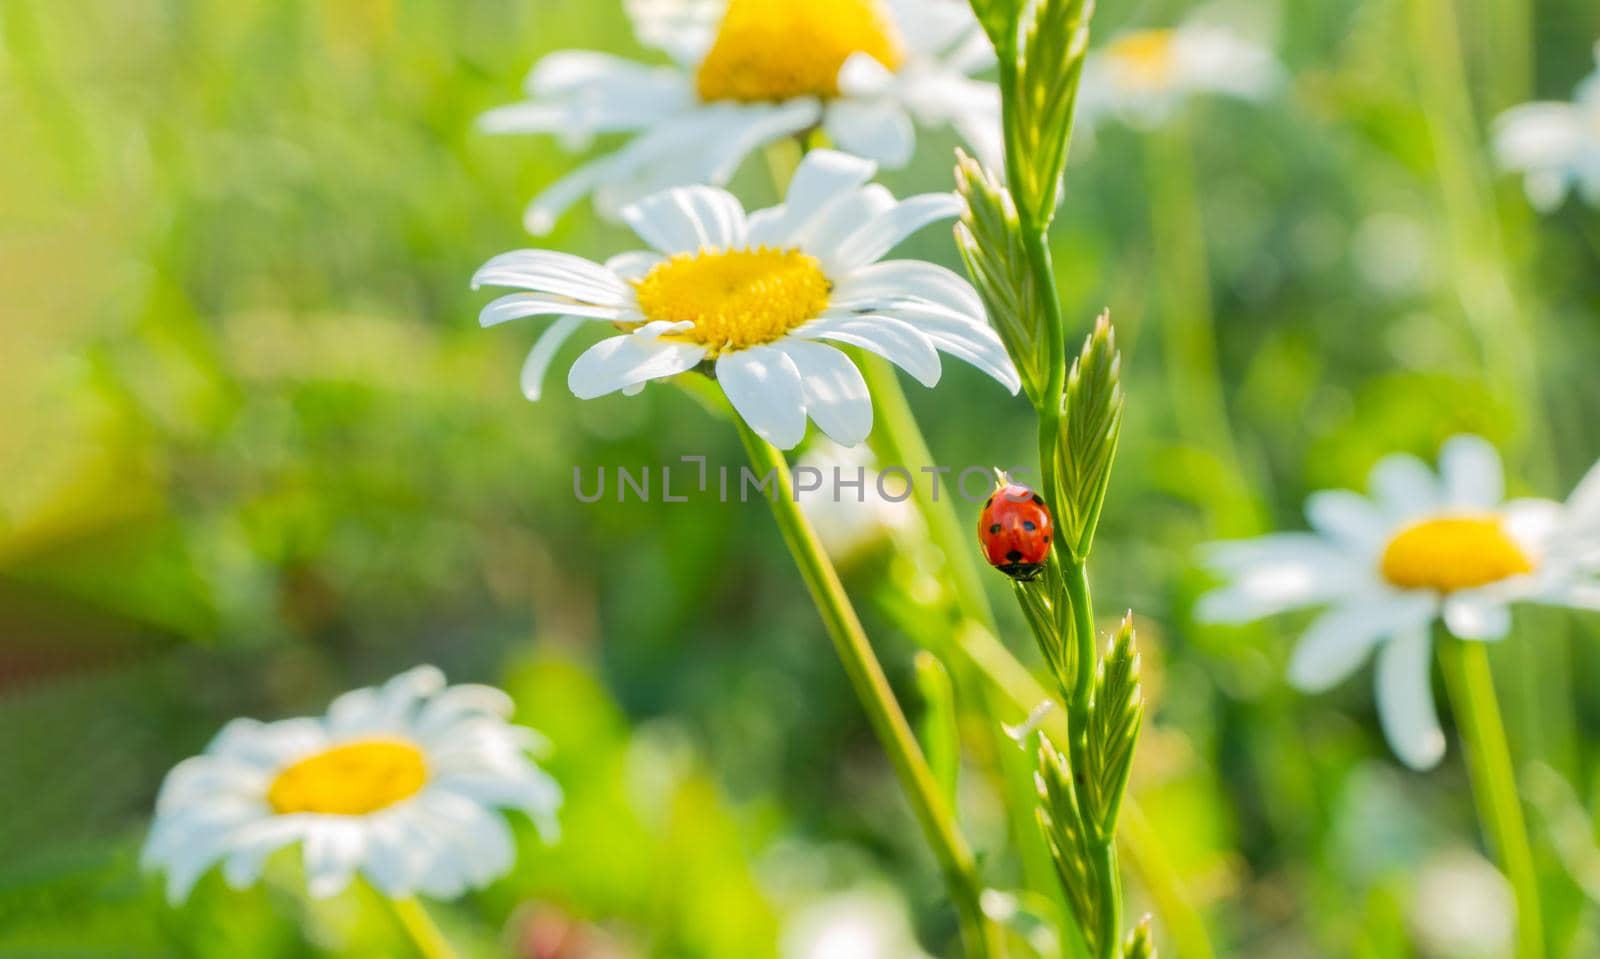 ladybug on chamomile flower close up, green natural blurred background. spring summer season. symbol of purity freshness nature, organic, ecological life. beautiful nature scene. copy space. High quality photo